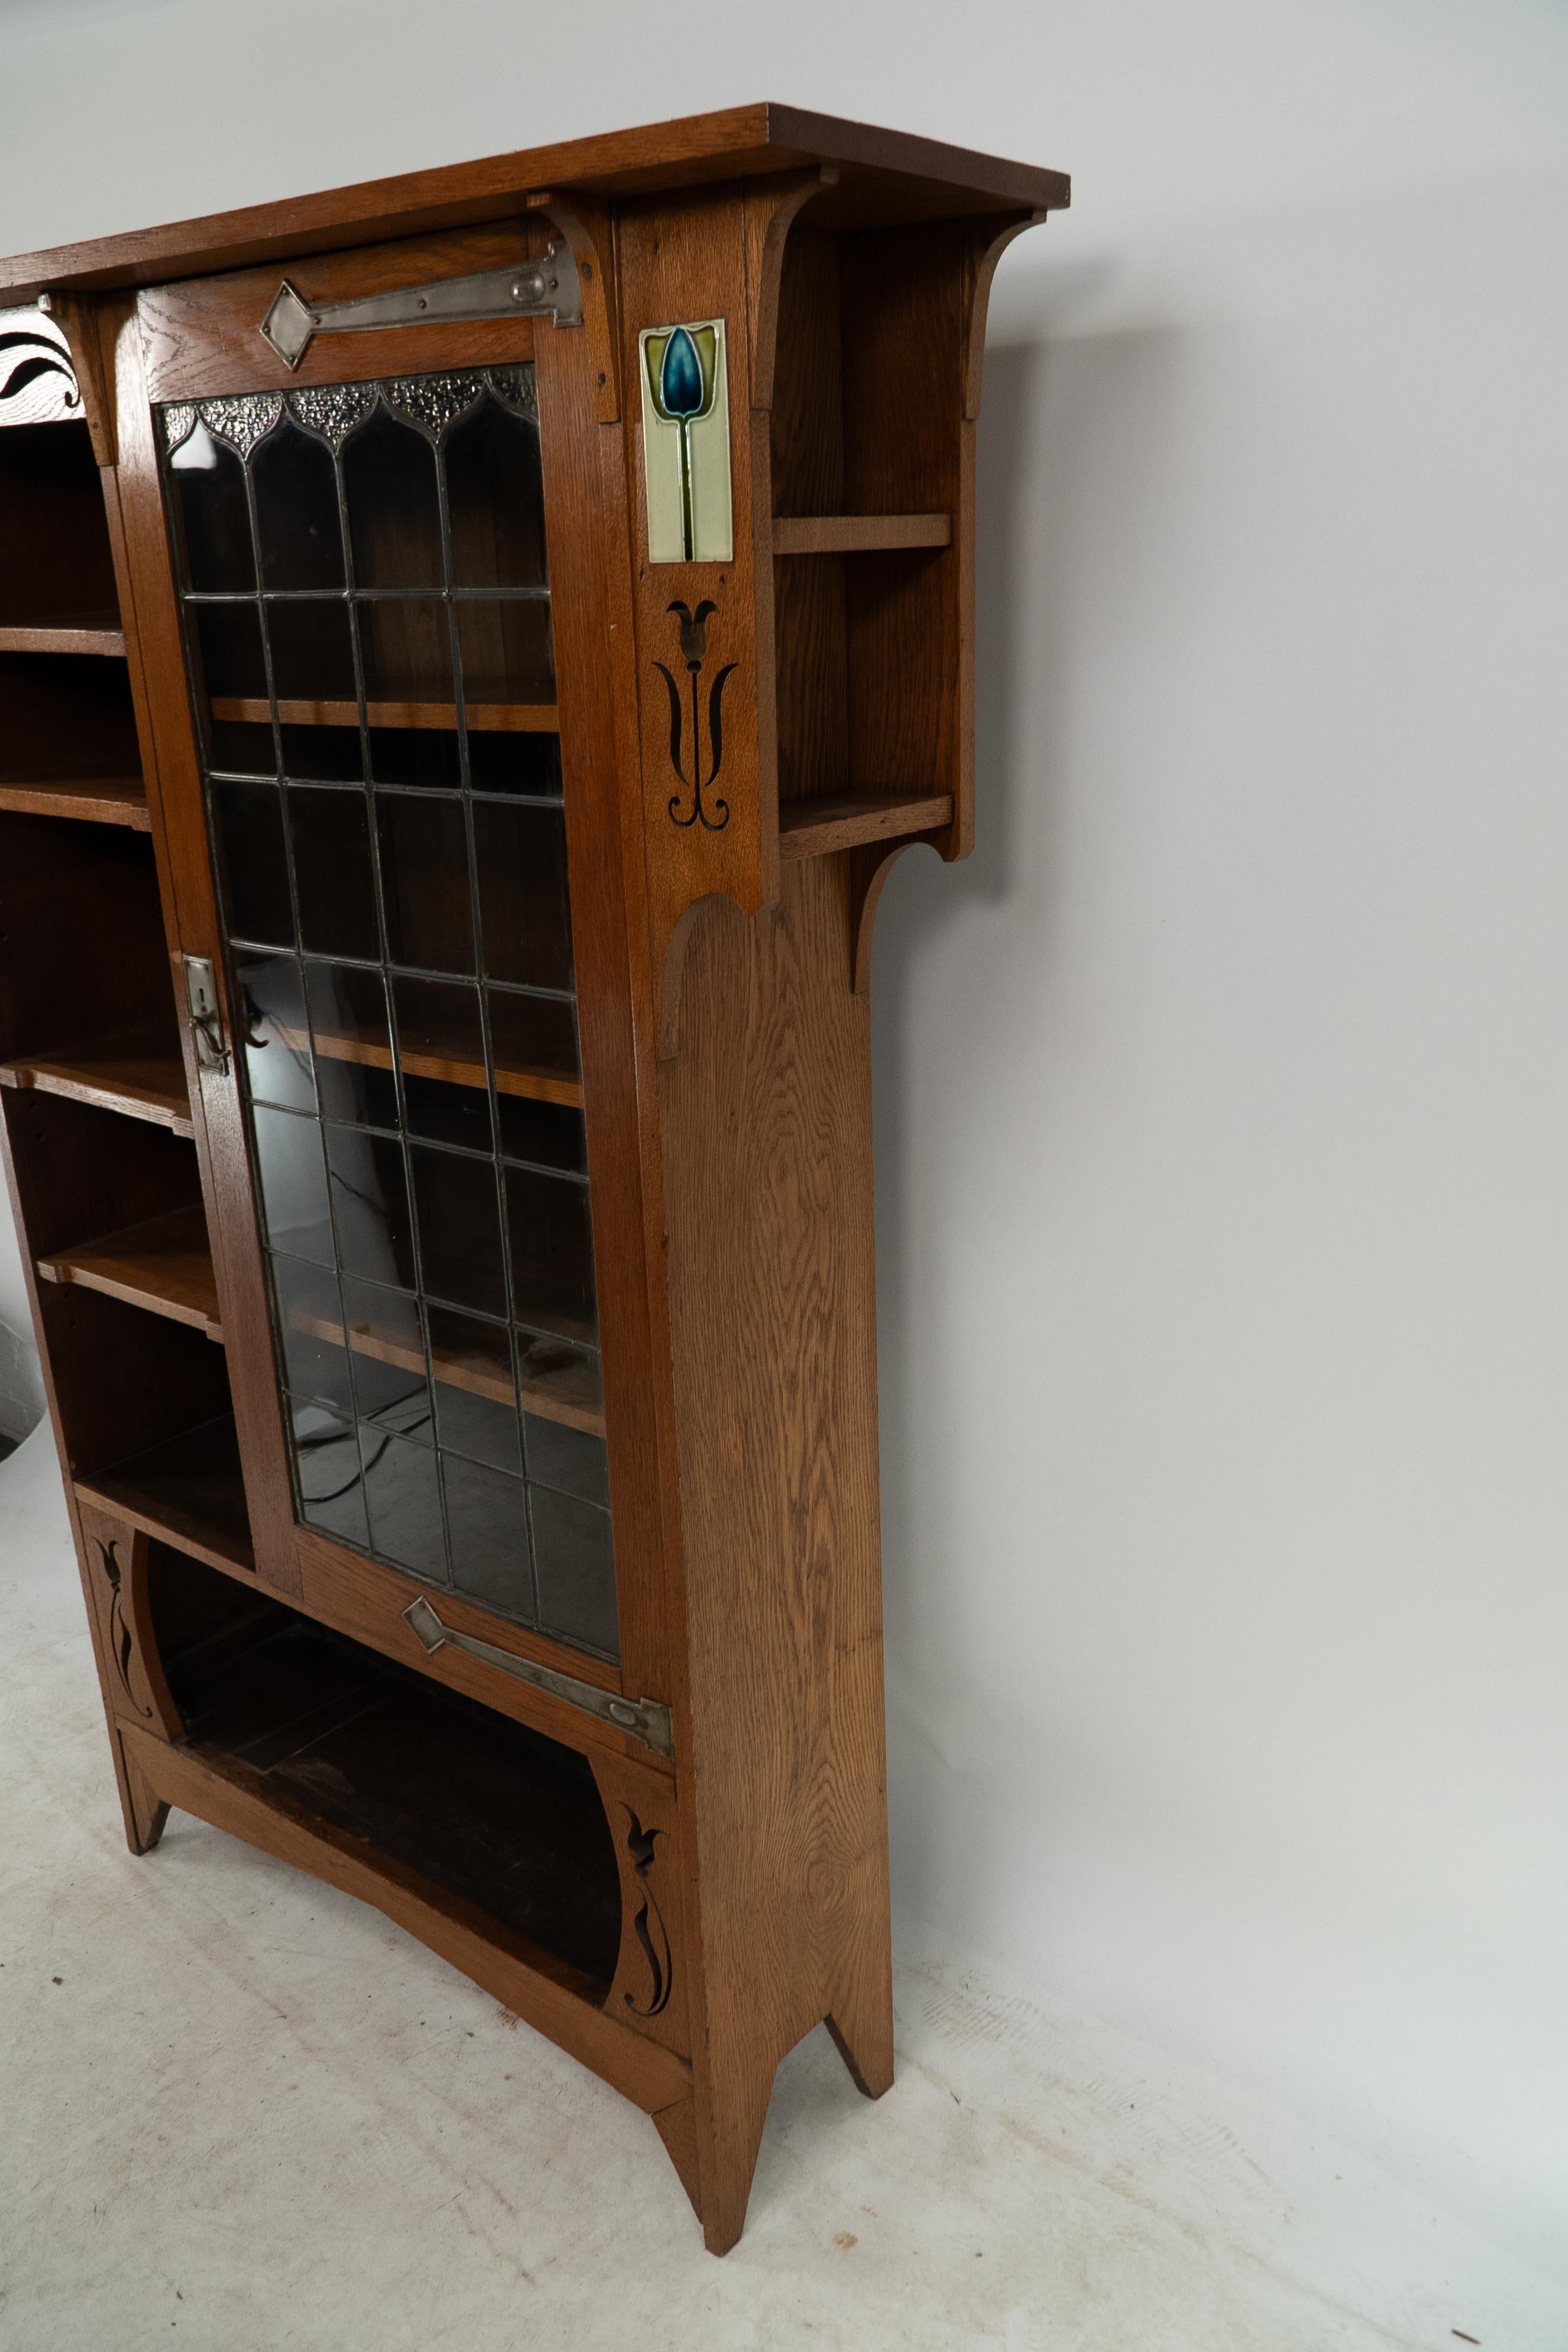 20th Century Arts and Crafts Oak Glazed Bookcase with inset period tiles For Sale